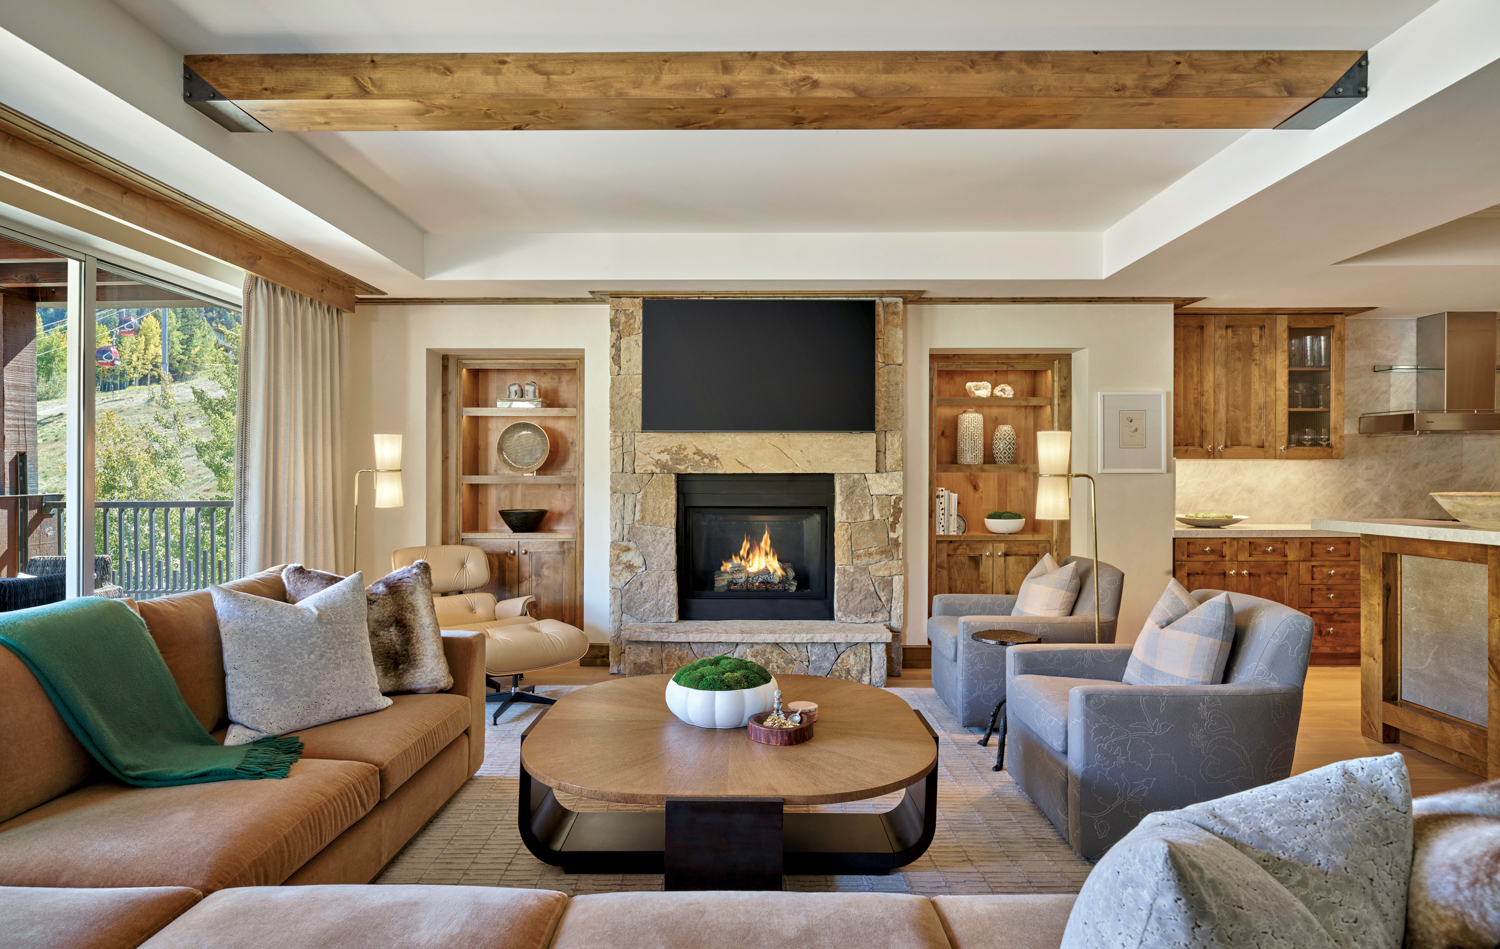 A living room with a fireplace and an assortment of armchairs and sofas around a large, round wooden coffee table.